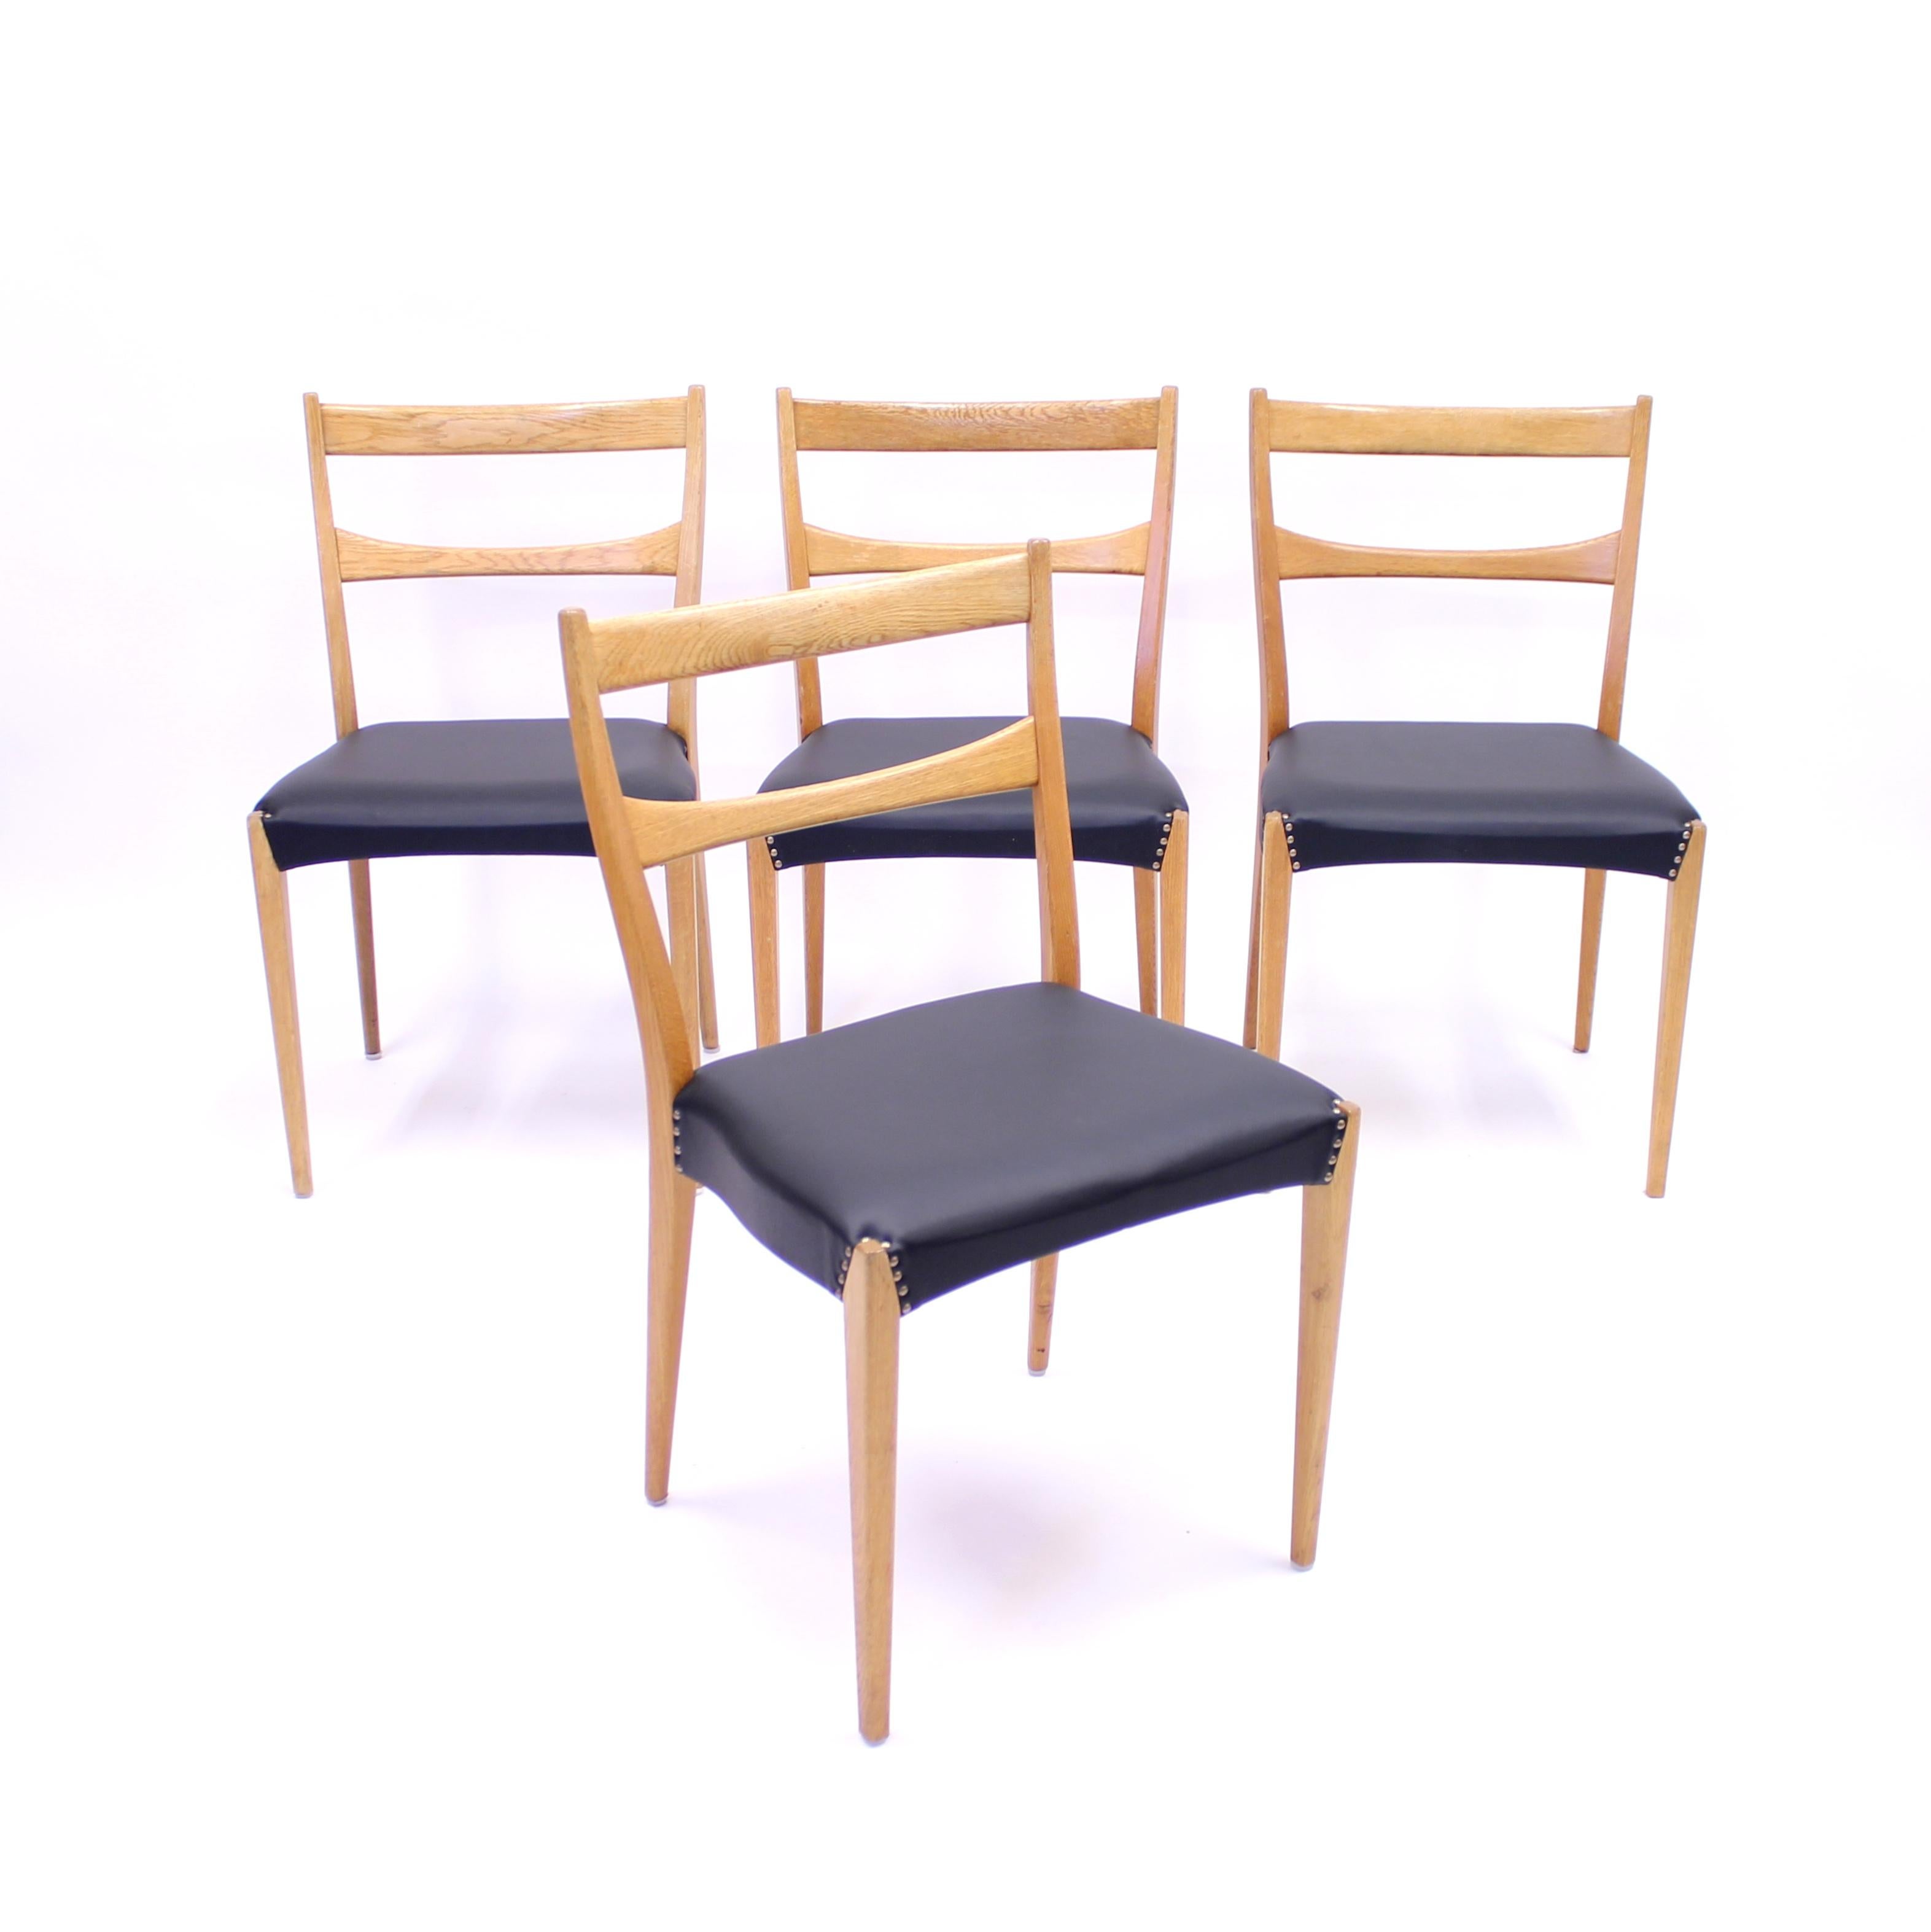 20th Century Scandinavian Oak Dining Chairs with Black Leather Seats, 1950s For Sale